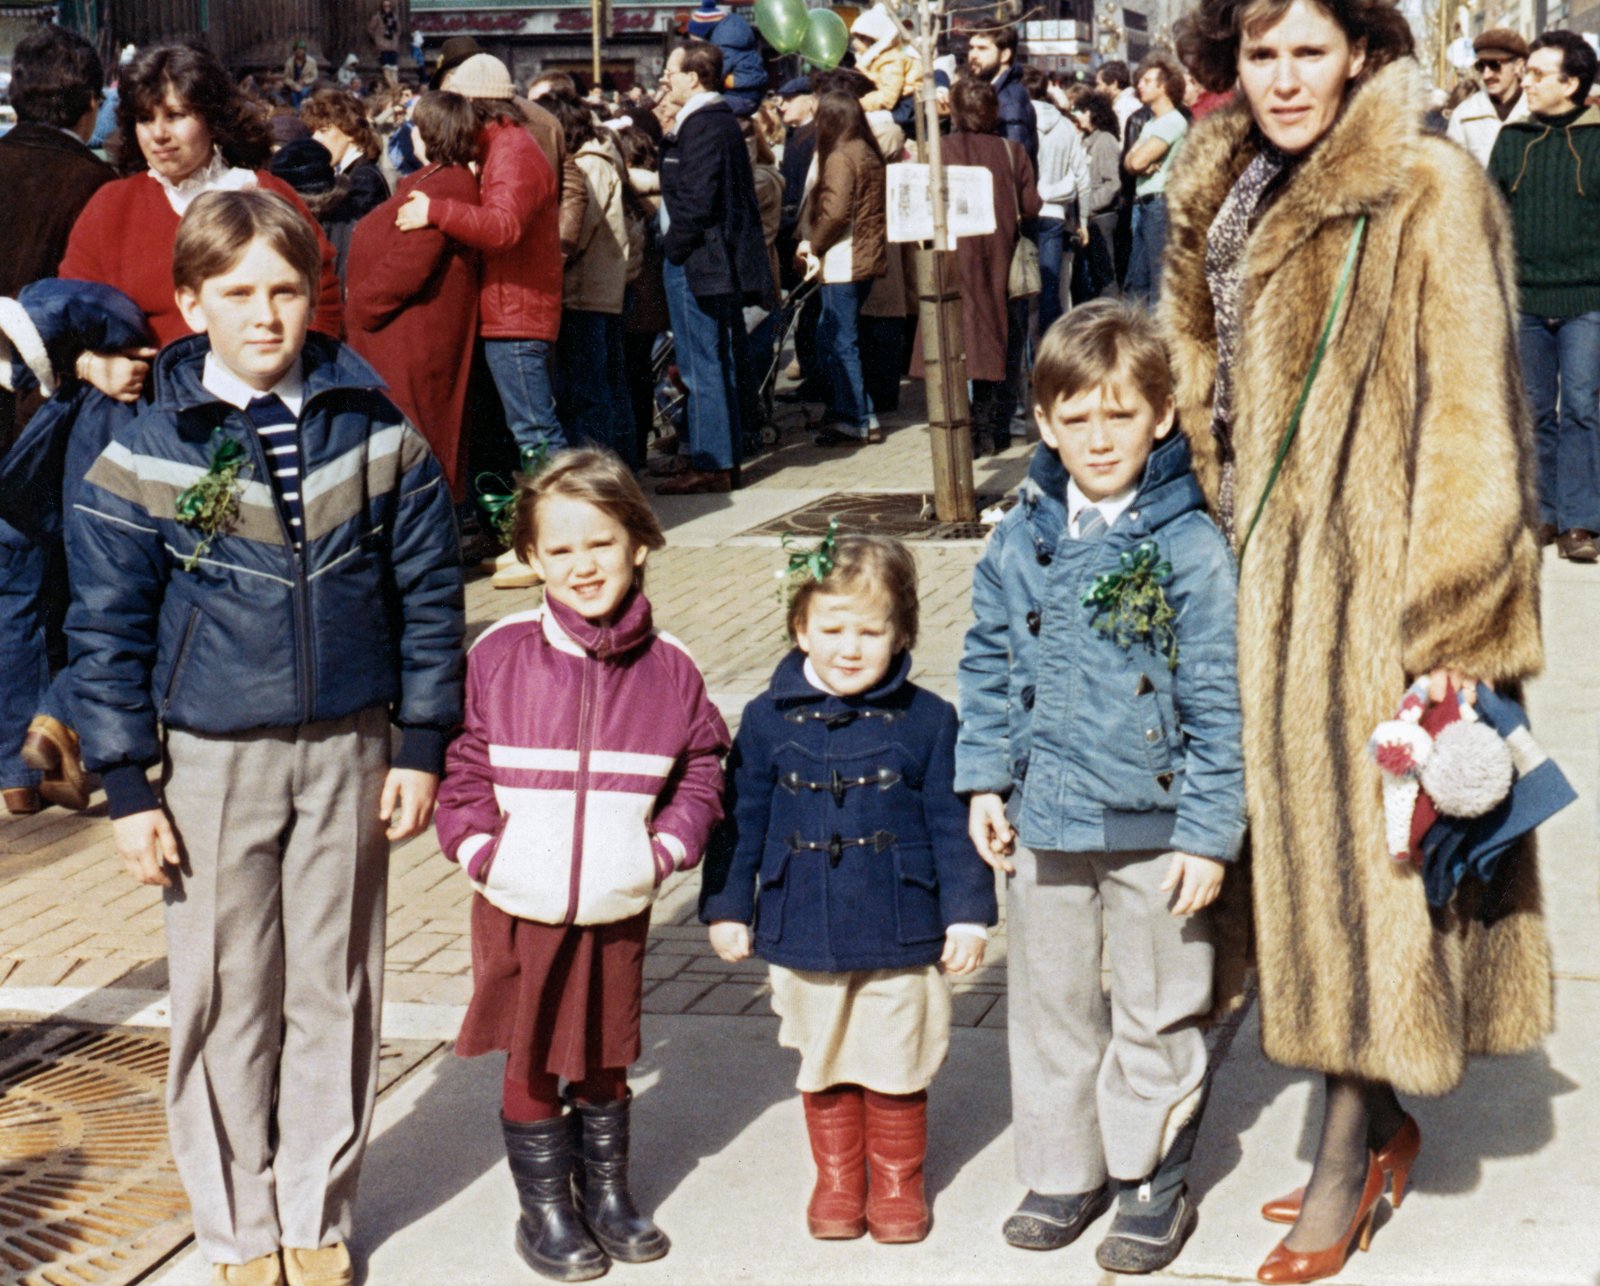 Patrick, Kathleen, Brigid, Kevin, and Margaret Shea attending the St. Patrick’s Day Parade on St. Catherine Street, Montreal, 1983.